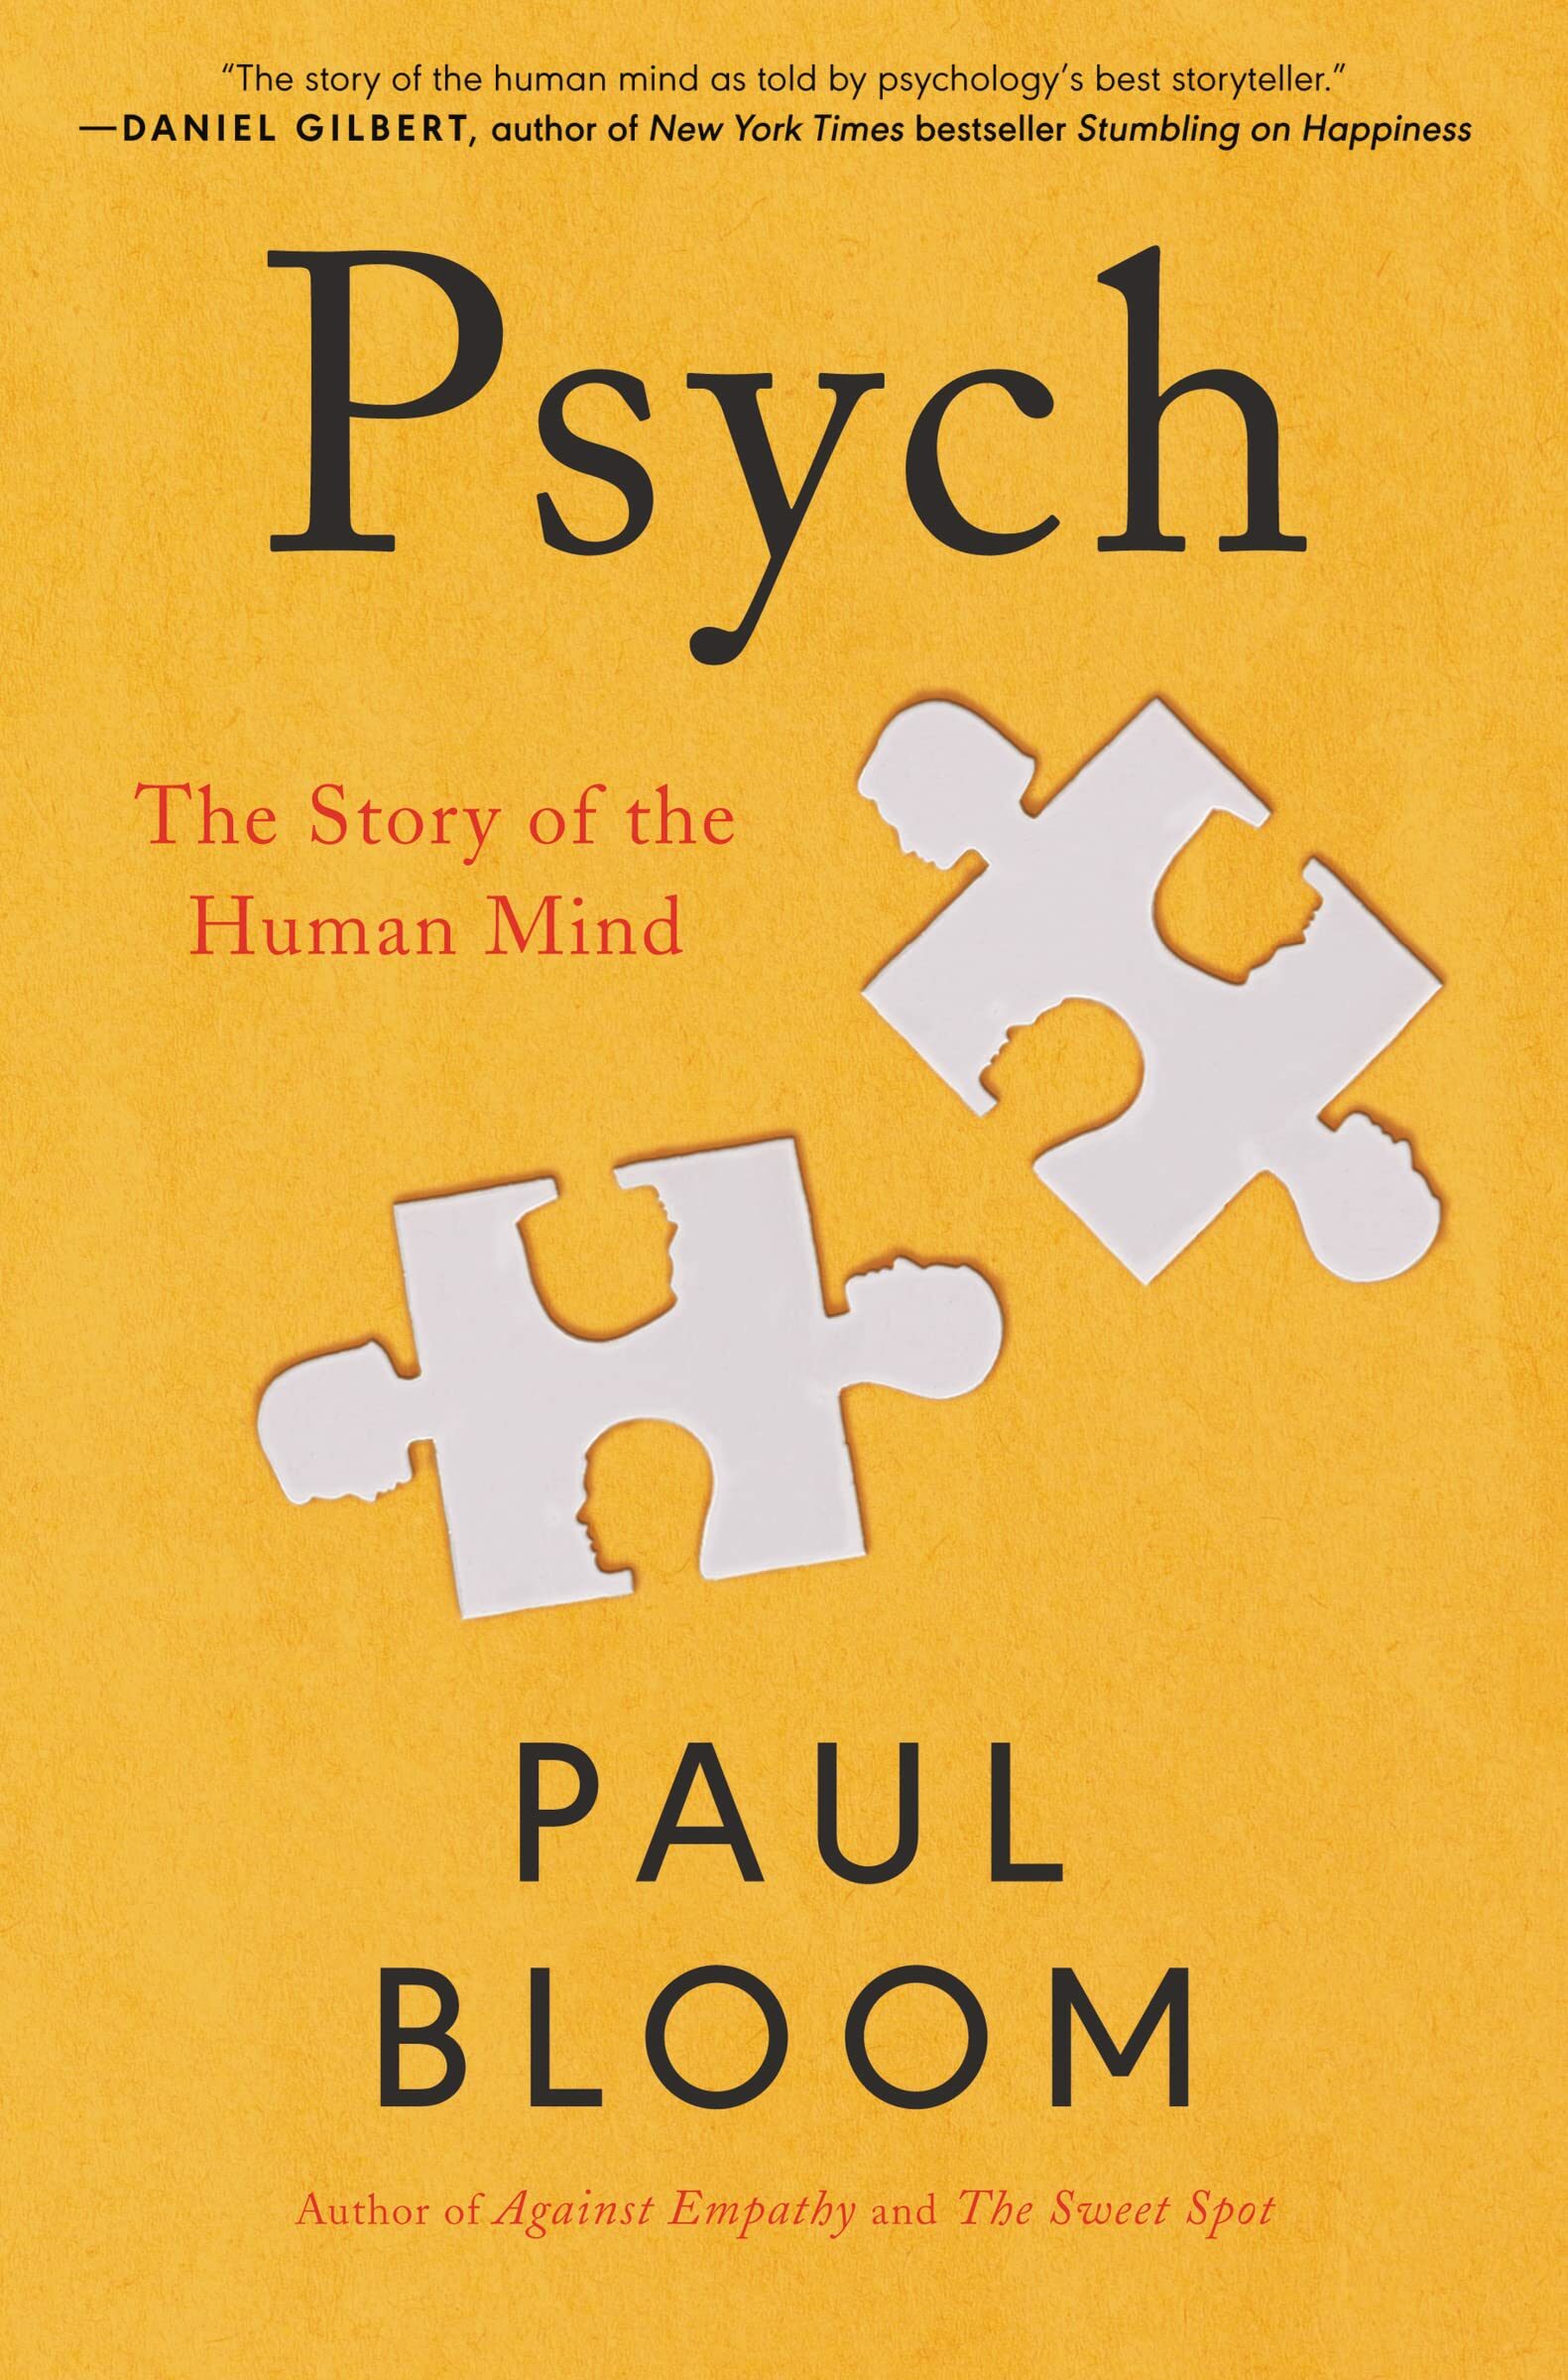 Psych: A Complete and Opinionated Tour of the Human Mind